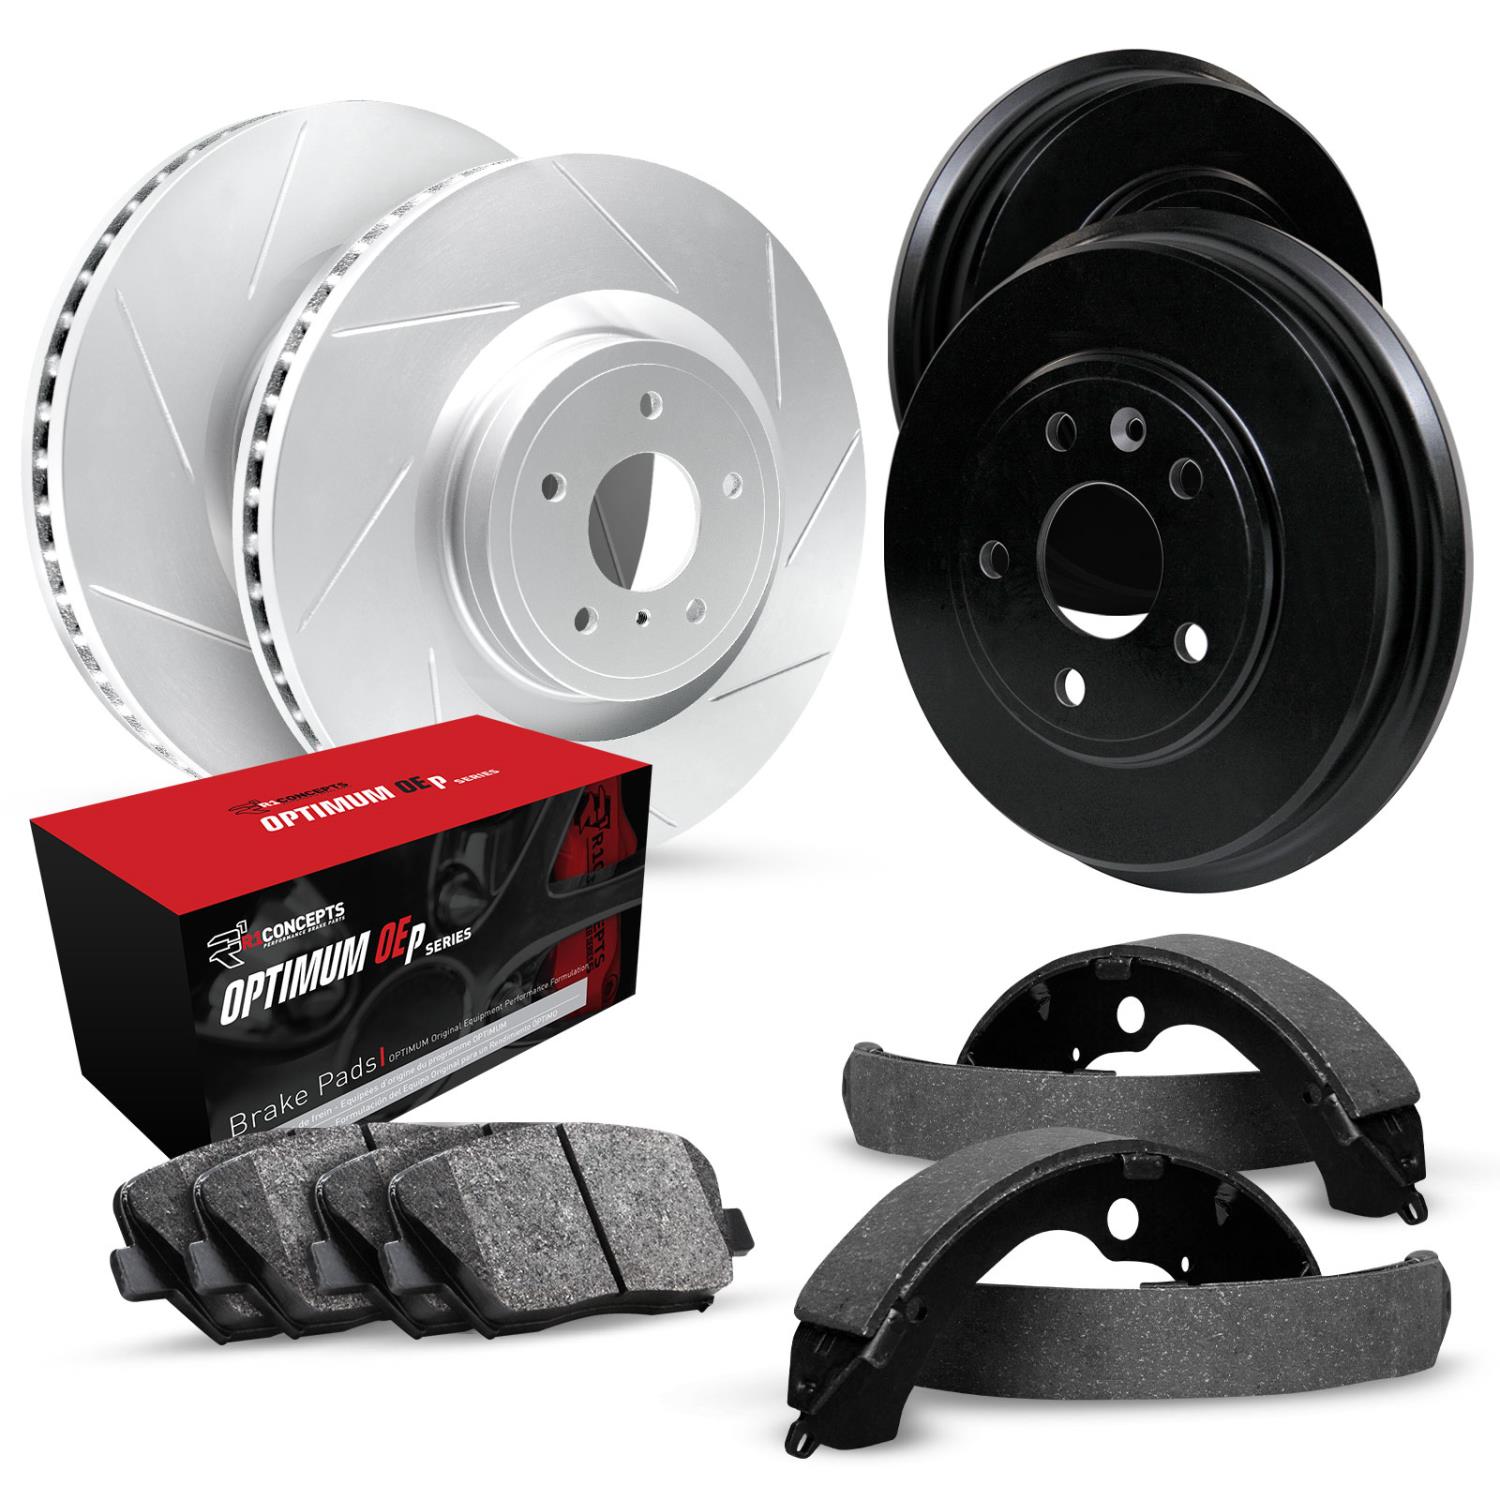 GEO-Carbon Slotted Brake Rotor & Drum Set w/Optimum OE Pads & Shoes, 1991-1991 GM, Position: Front & Rear